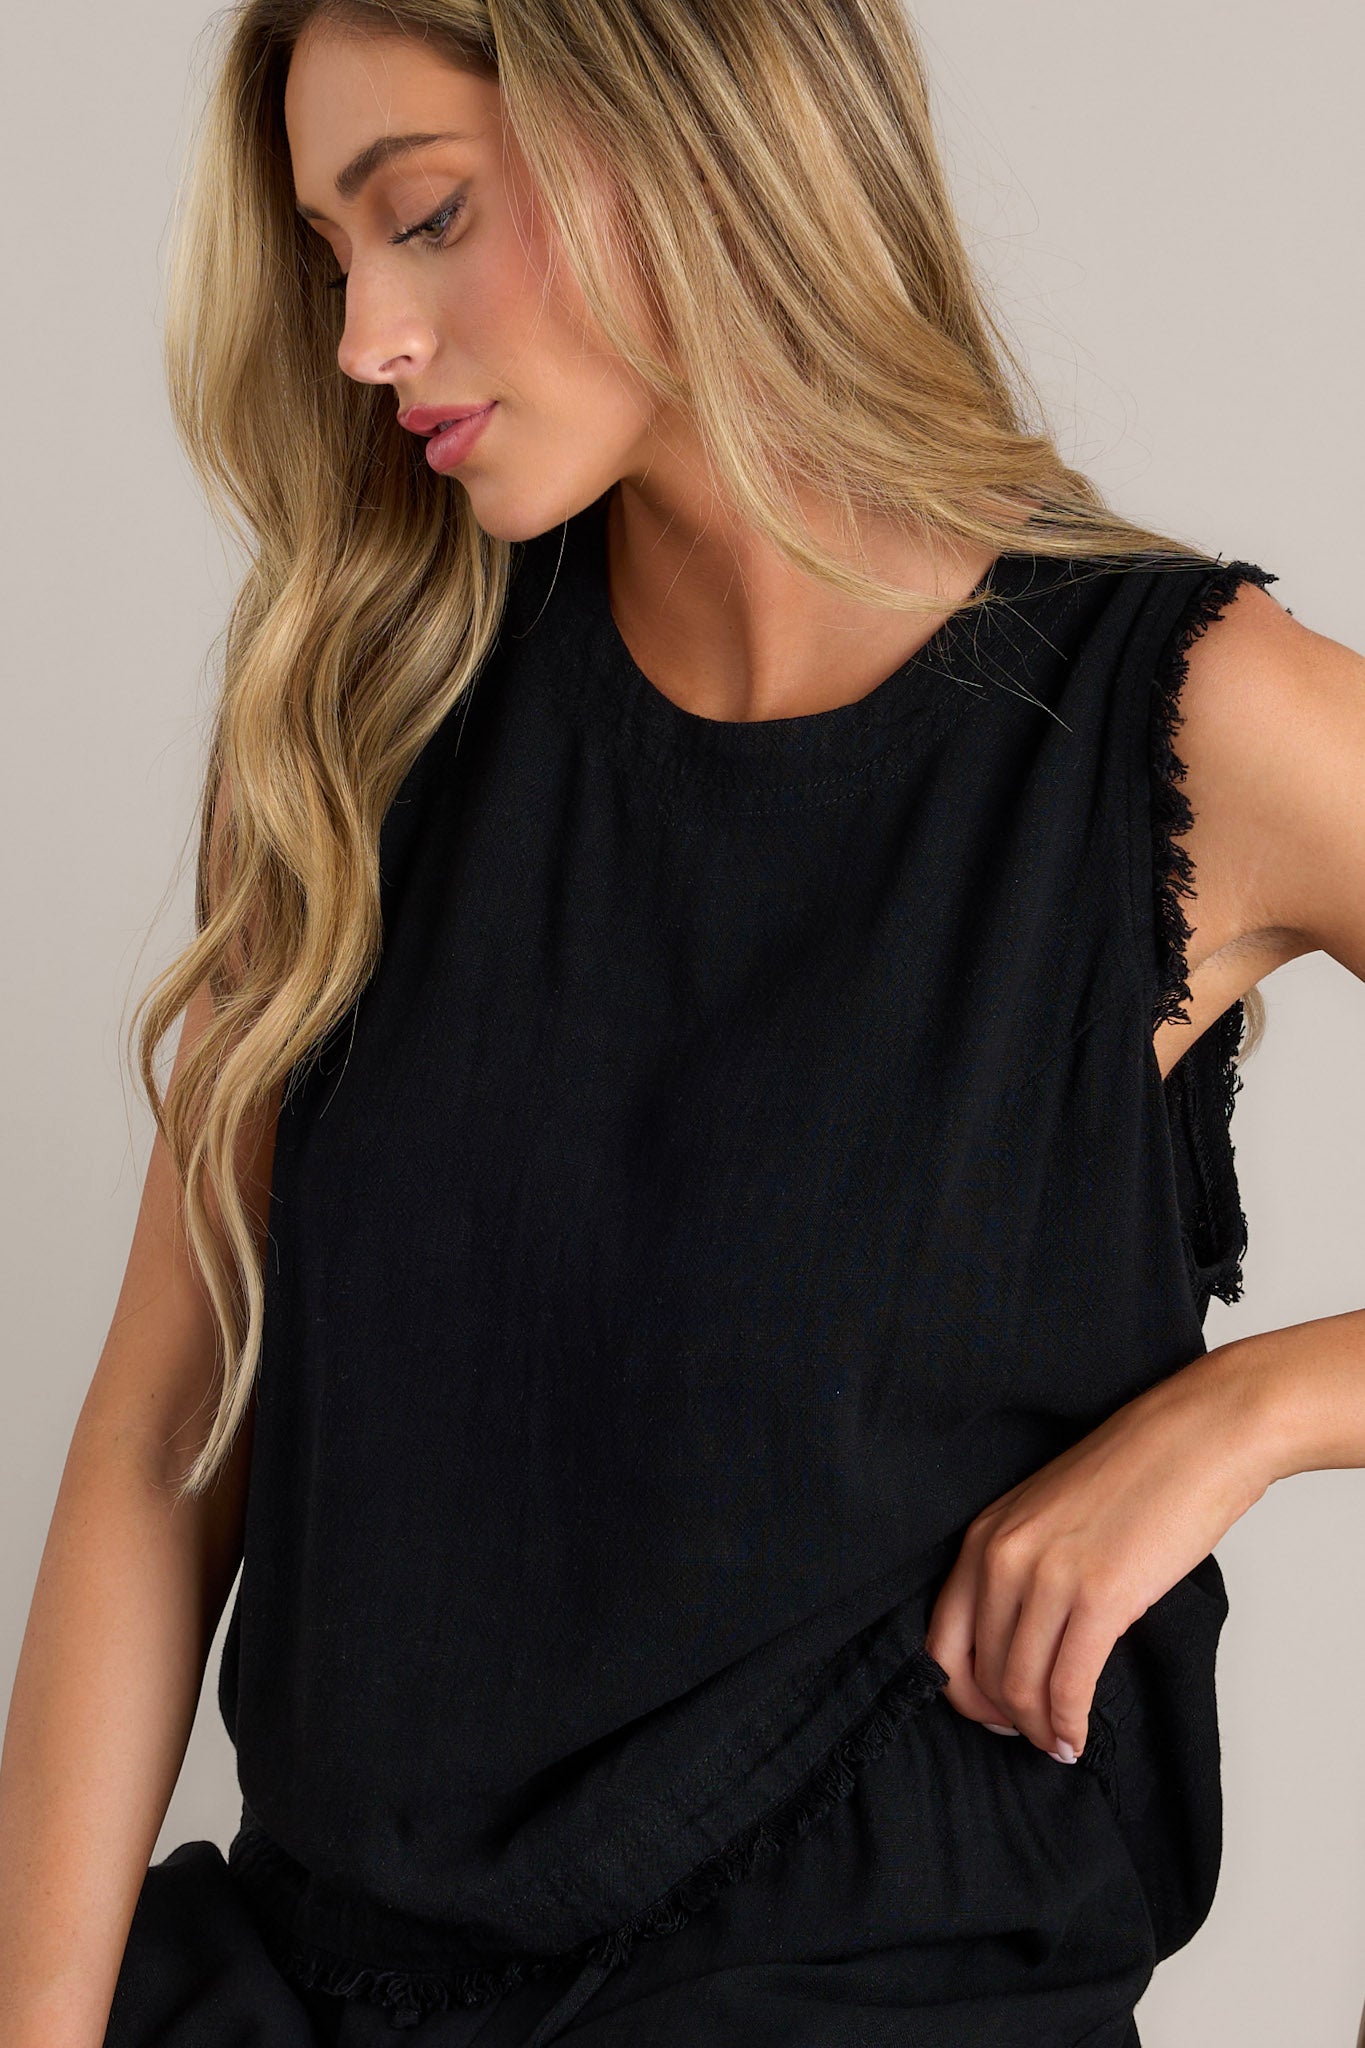 This black tank features a crew neckline, functional buttons down the back, frayed shoulders, and a frayed hemline.